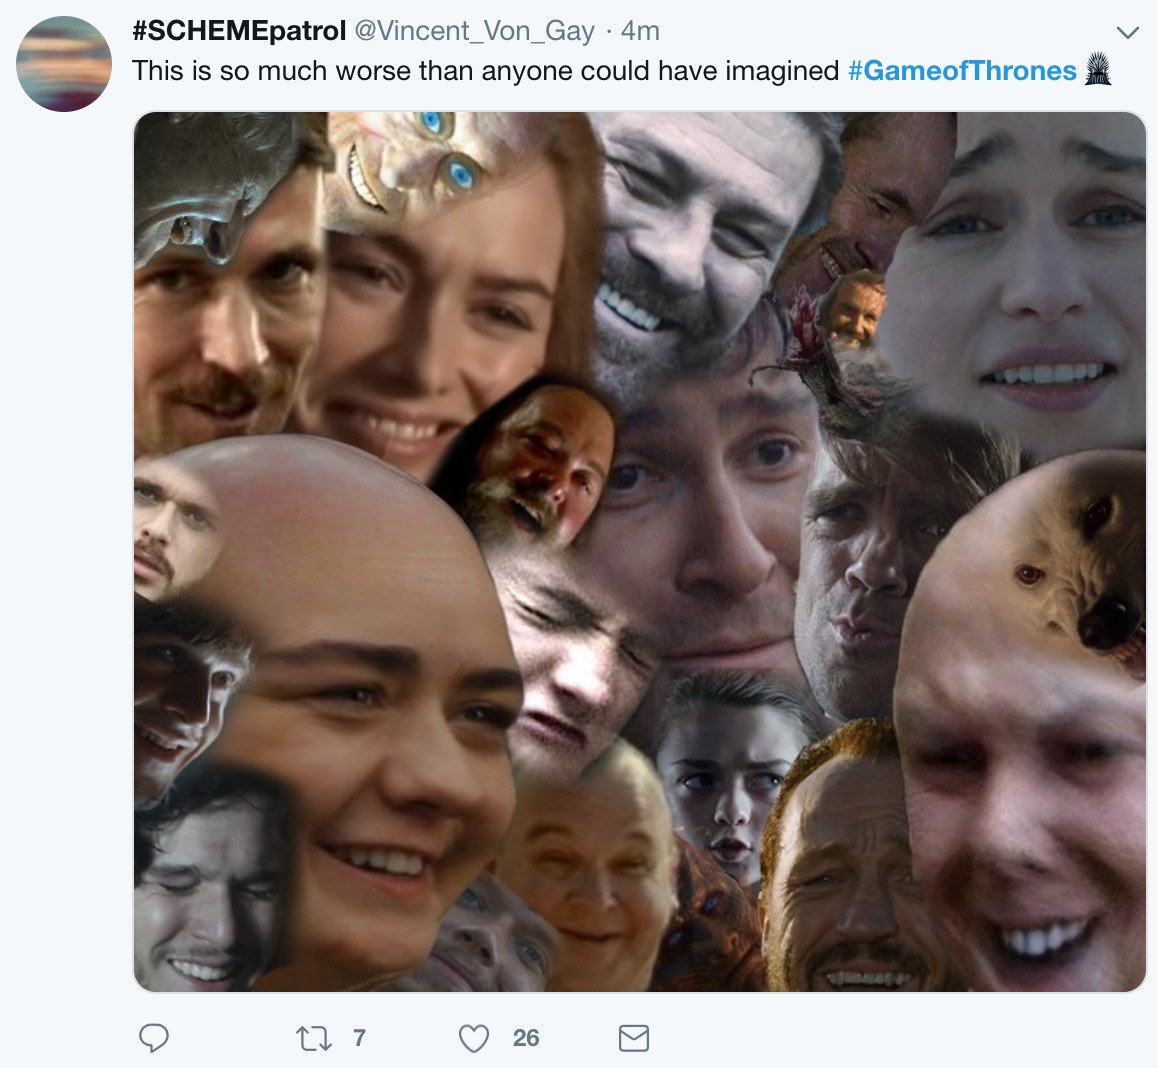 game of thrones final episode meme - smile - A 4m This is so much worse than anyone could have imagined this is so muchou D 227 0 26